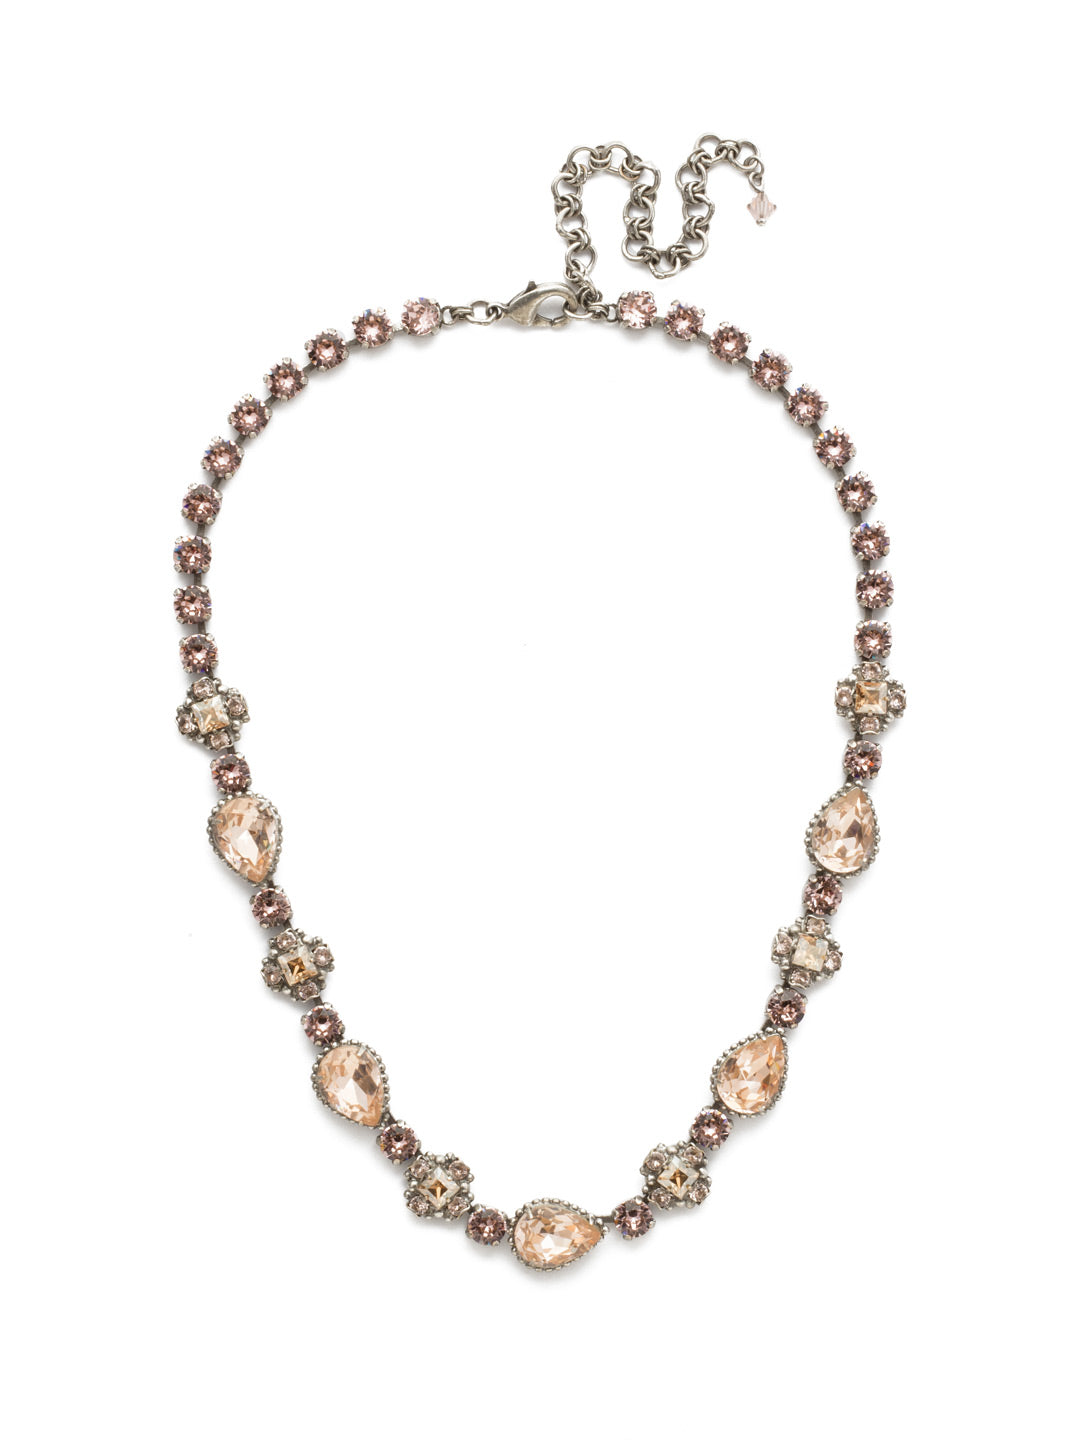 Posey Line Tennis Necklace - NDT9ASSBL - <p>Pear shaped crystals set in decorative edging alternate with vintage inspired crystal clusters for a unique design. From Sorrelli's Satin Blush collection in our Antique Silver-tone finish.</p>